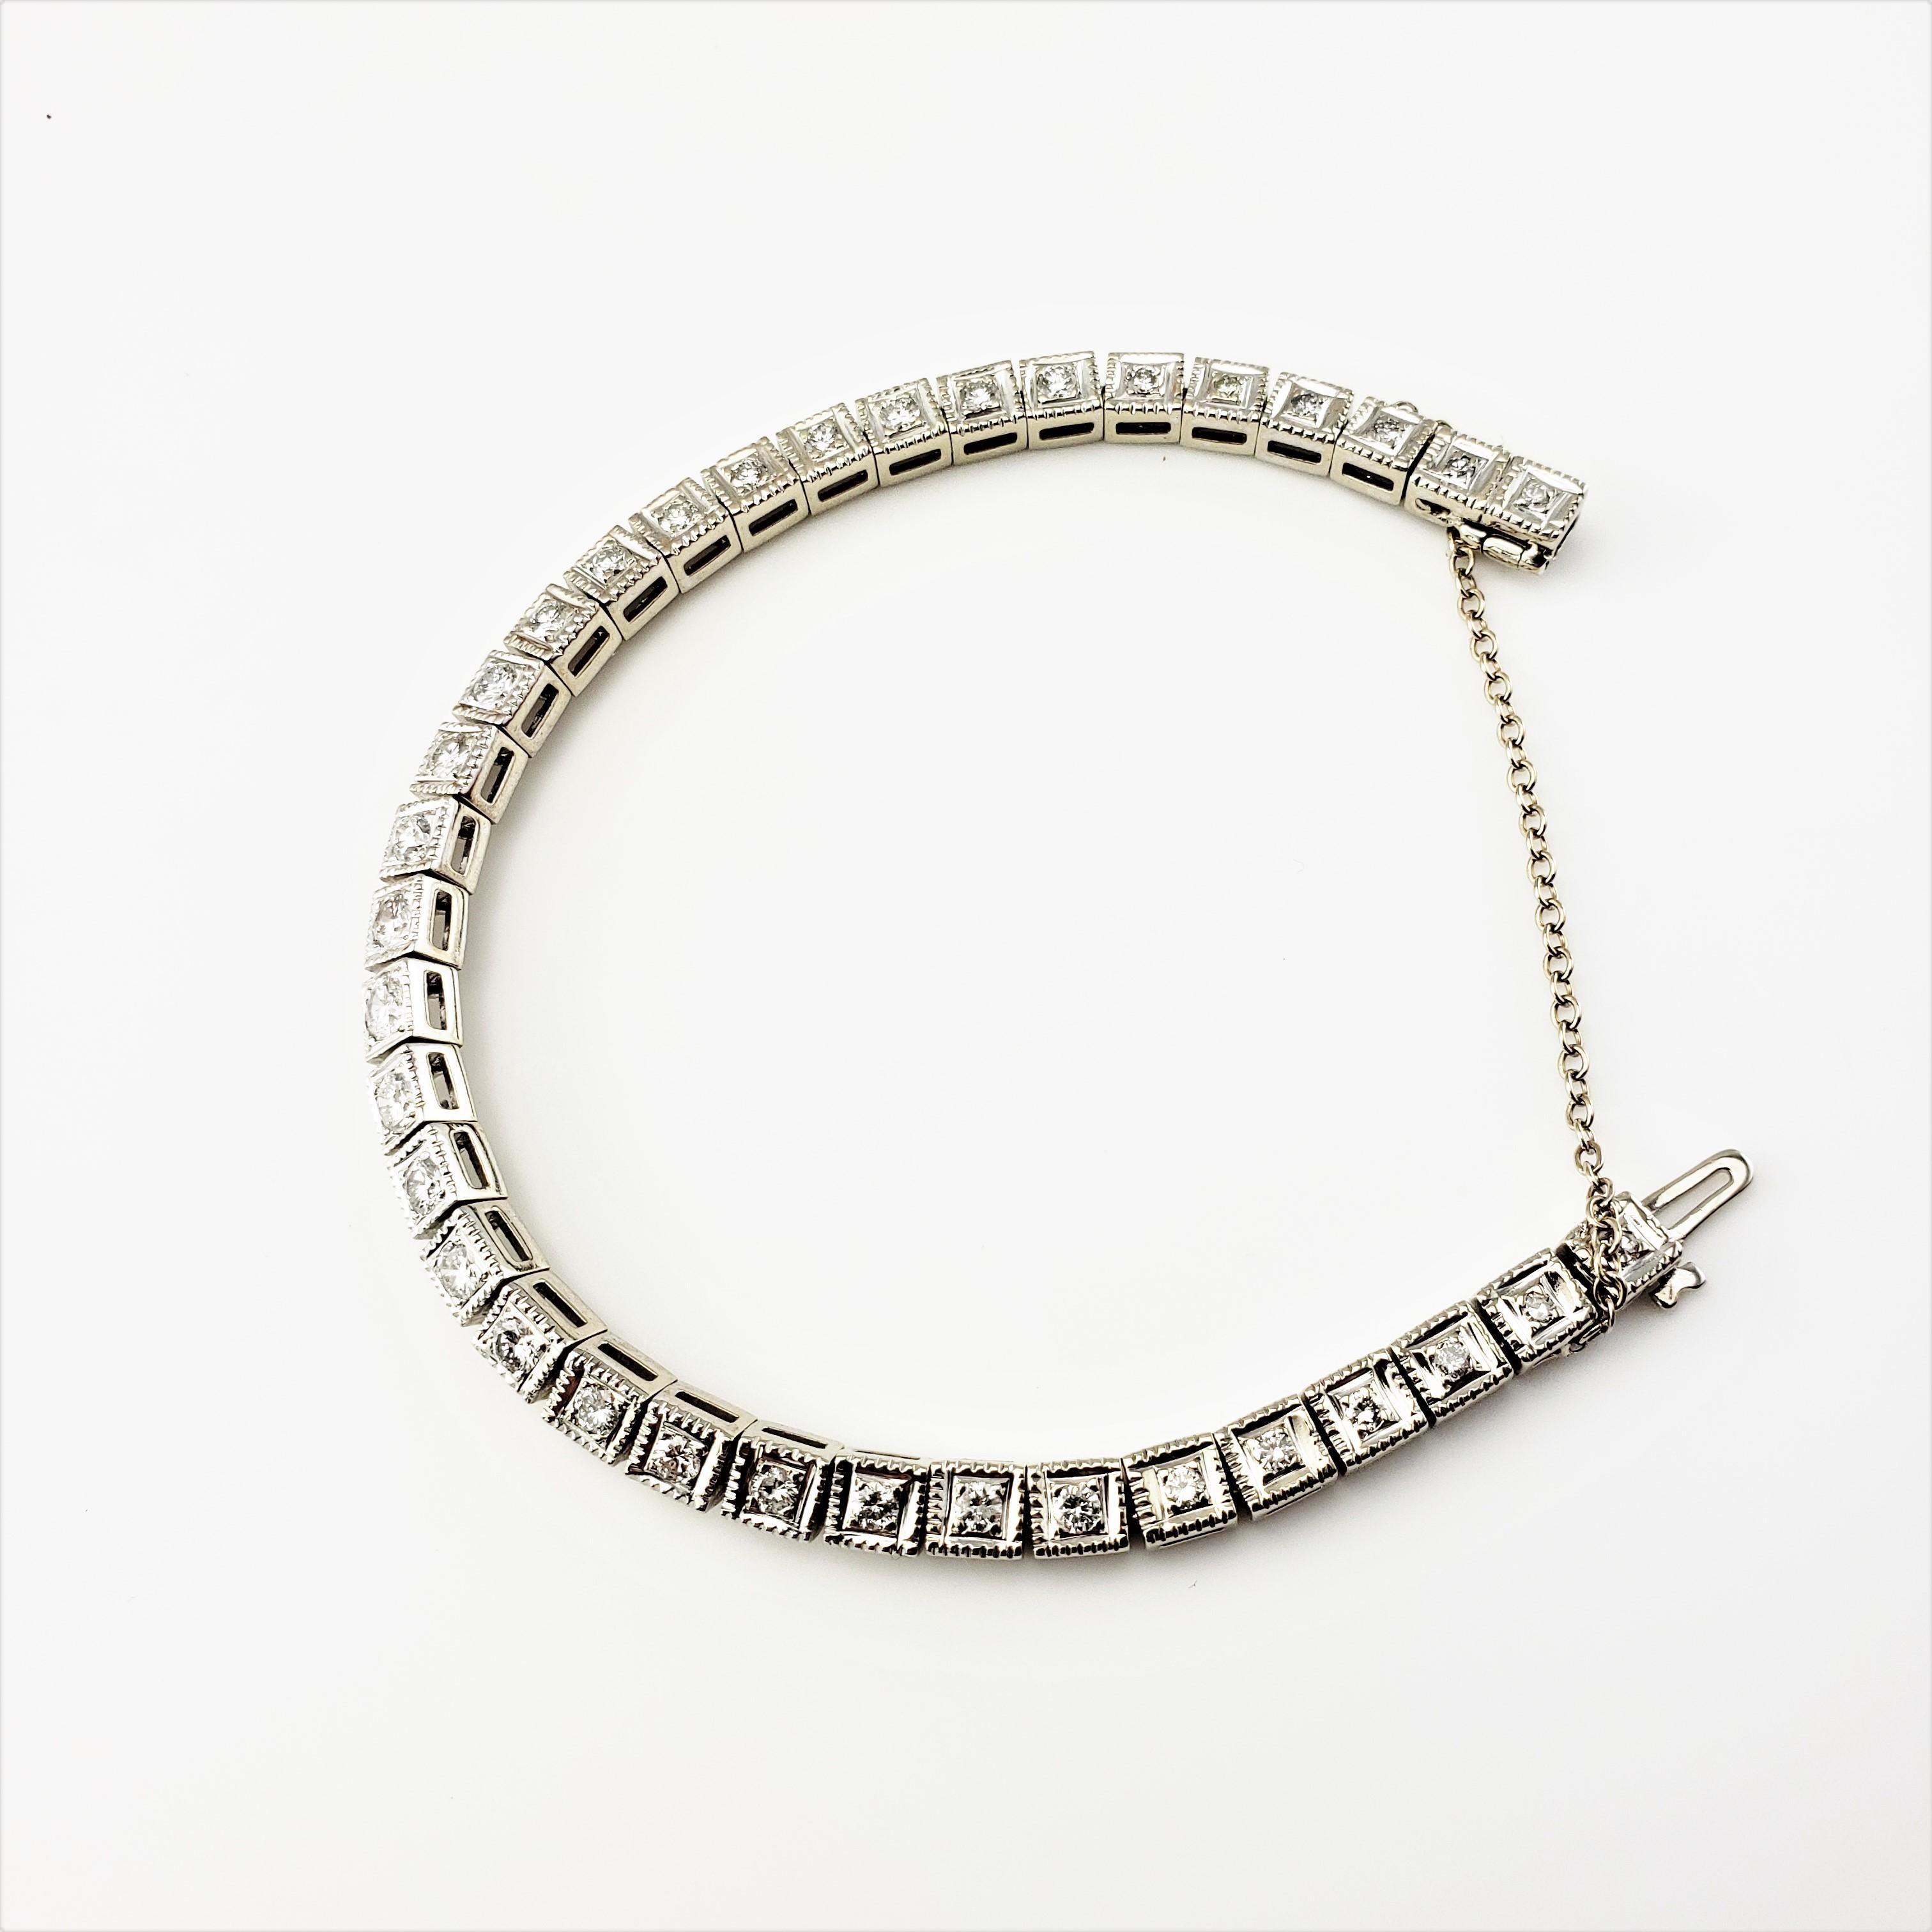 14 Karat White Gold Diamond Bracelet-

This sparkling bracelet features 31 round brilliant cut diamonds and 4 round single cut diamonds set in classic 14K white gold.  Safety chain closure.  Width:  5 mm.

Approximate total diamond weight:  1.15